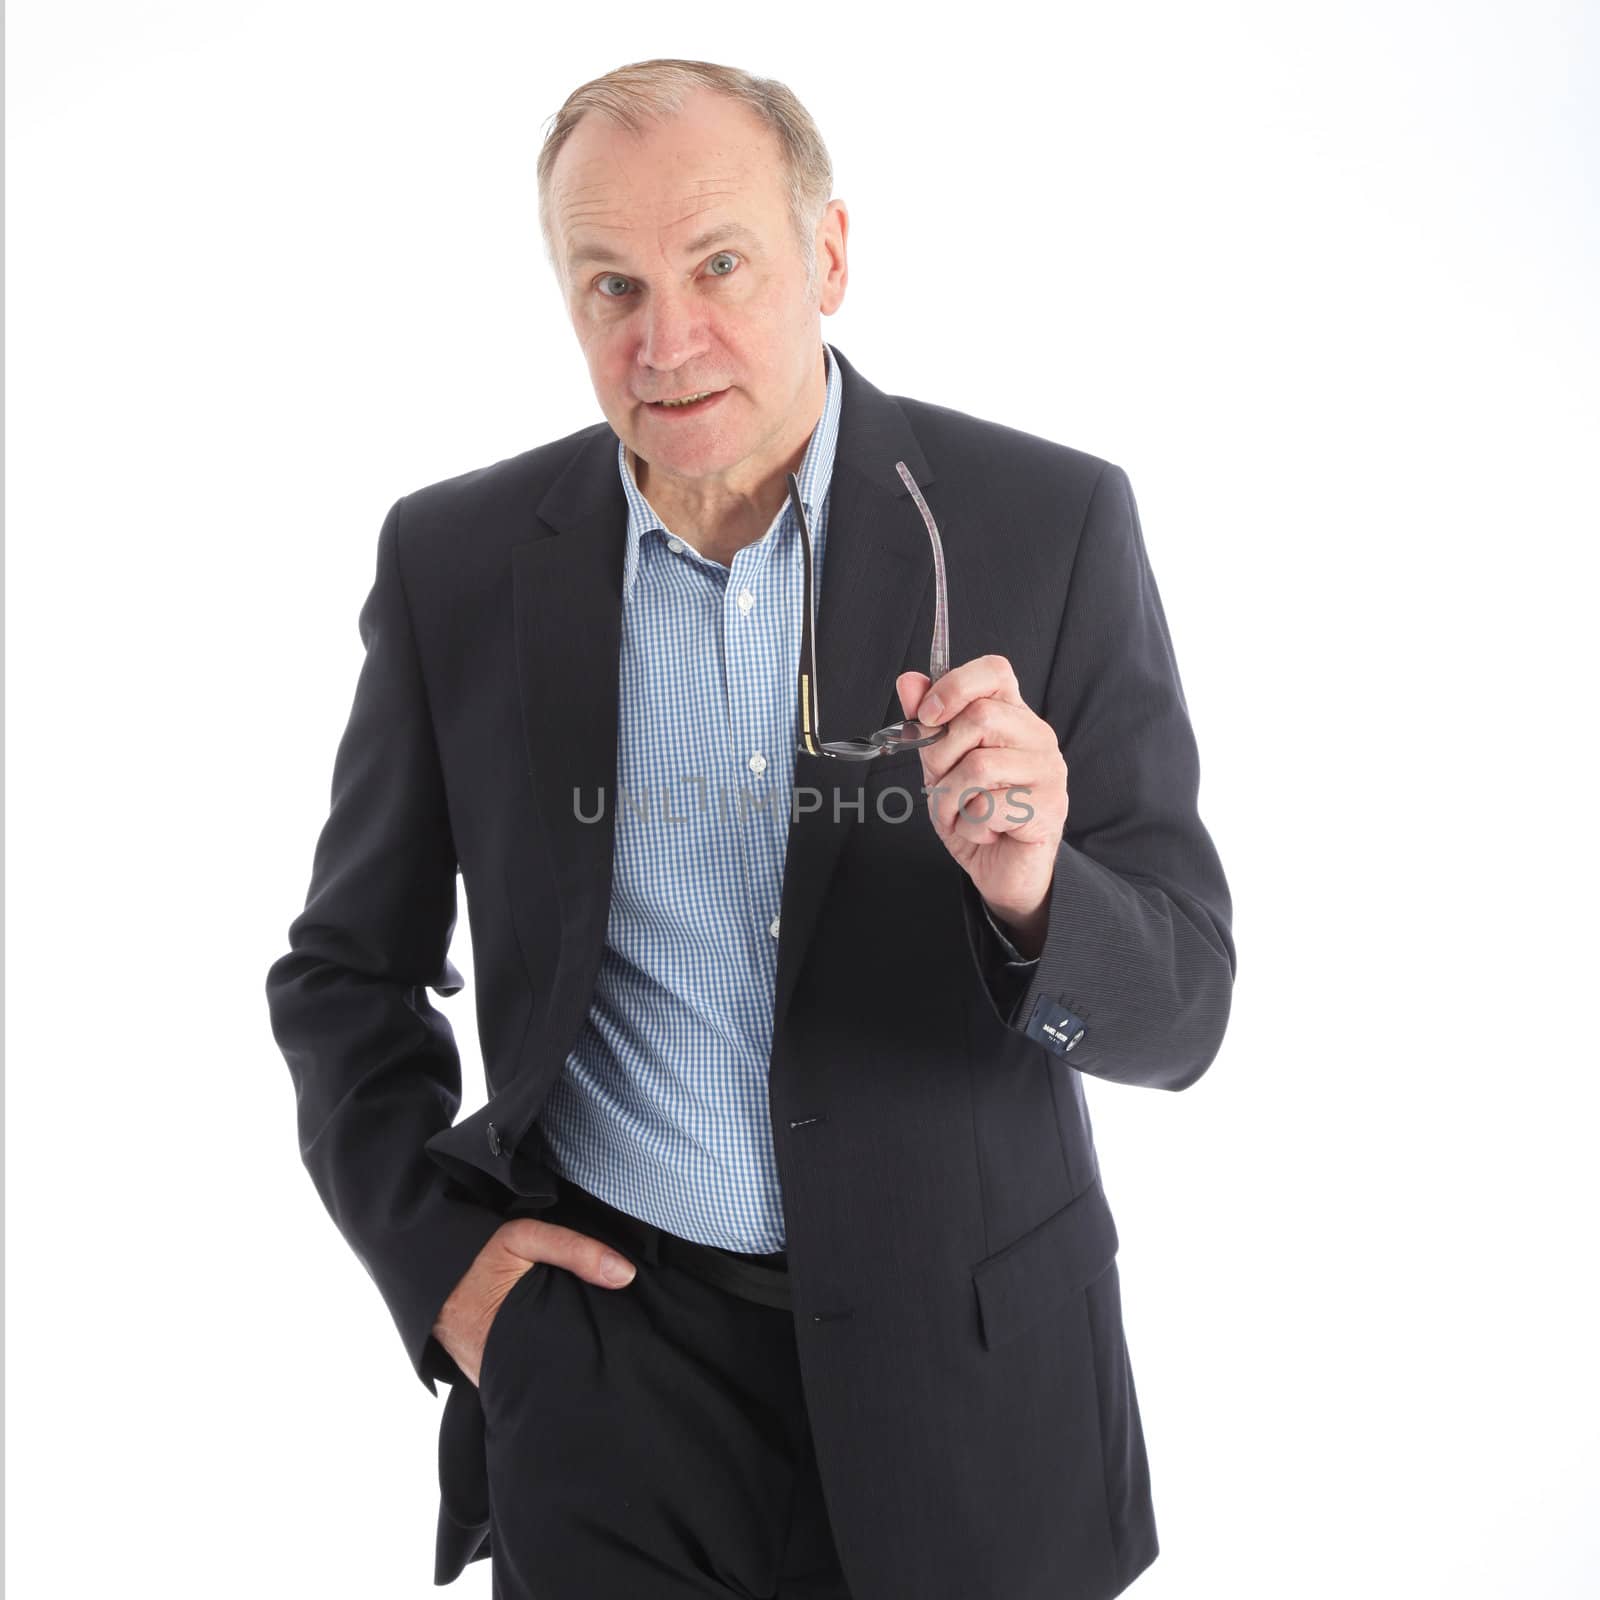 Assertive talkative businessman gesturing with his glasses as he tries to make a point in the discussion 